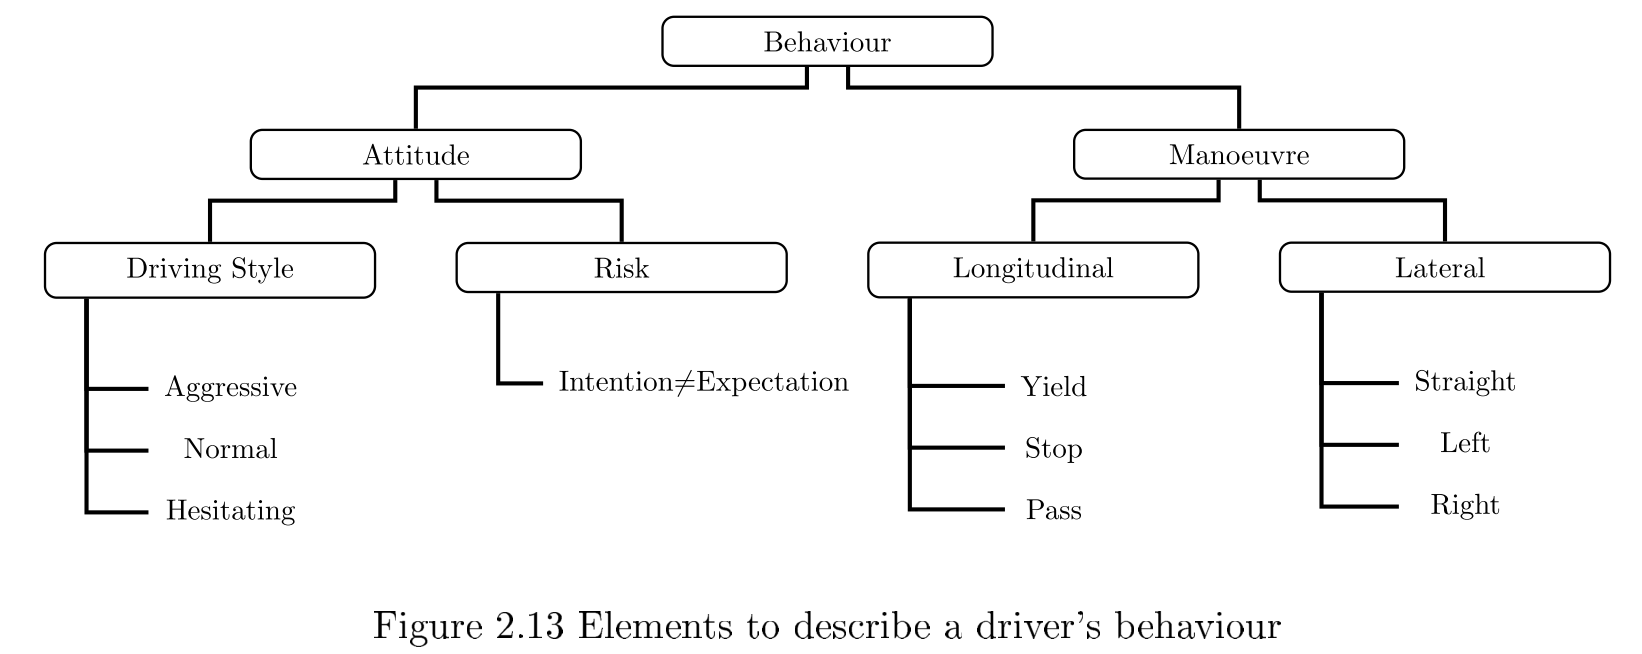 As noted in my report of IV19, risk assessment can be performed by comparing the expectated behaviour (expectation) to the inferred behaviour (intention), i.e. what should be done in the situation and what is actually observed. A discrepancy can detect some misinterpretation of the scene. Source.